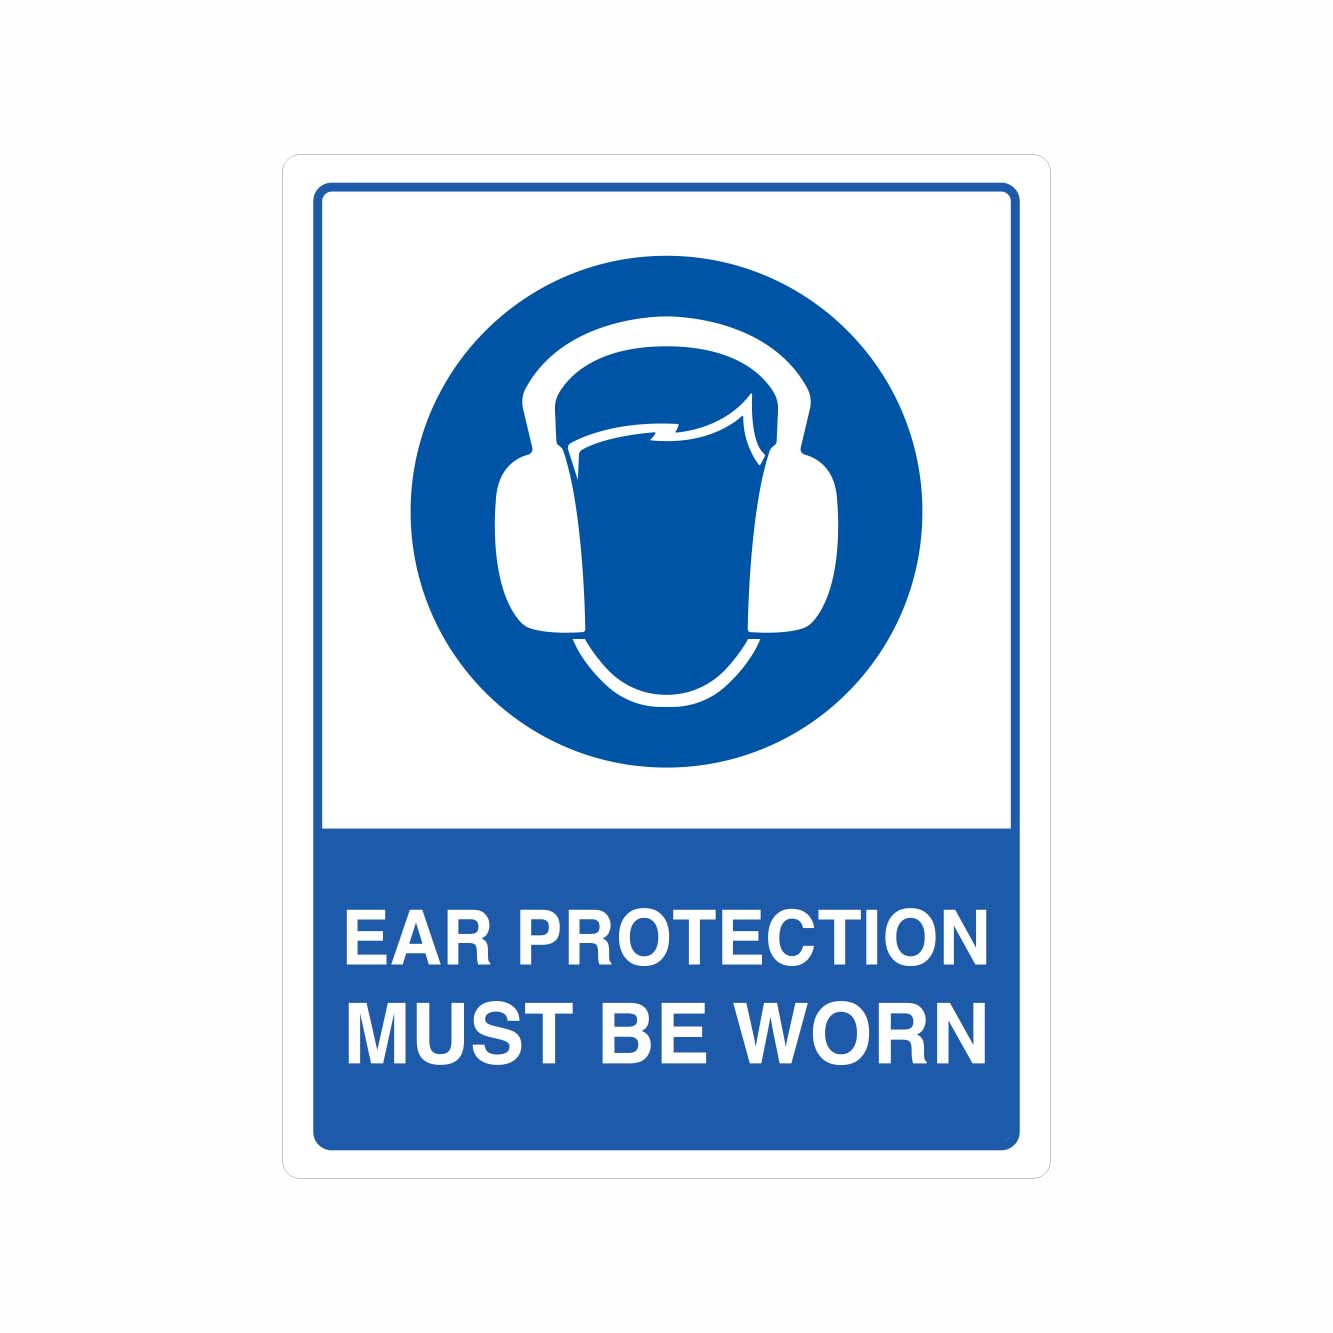 EAR PROTECTION MUST BE WORN SIGN - GET SIGNS